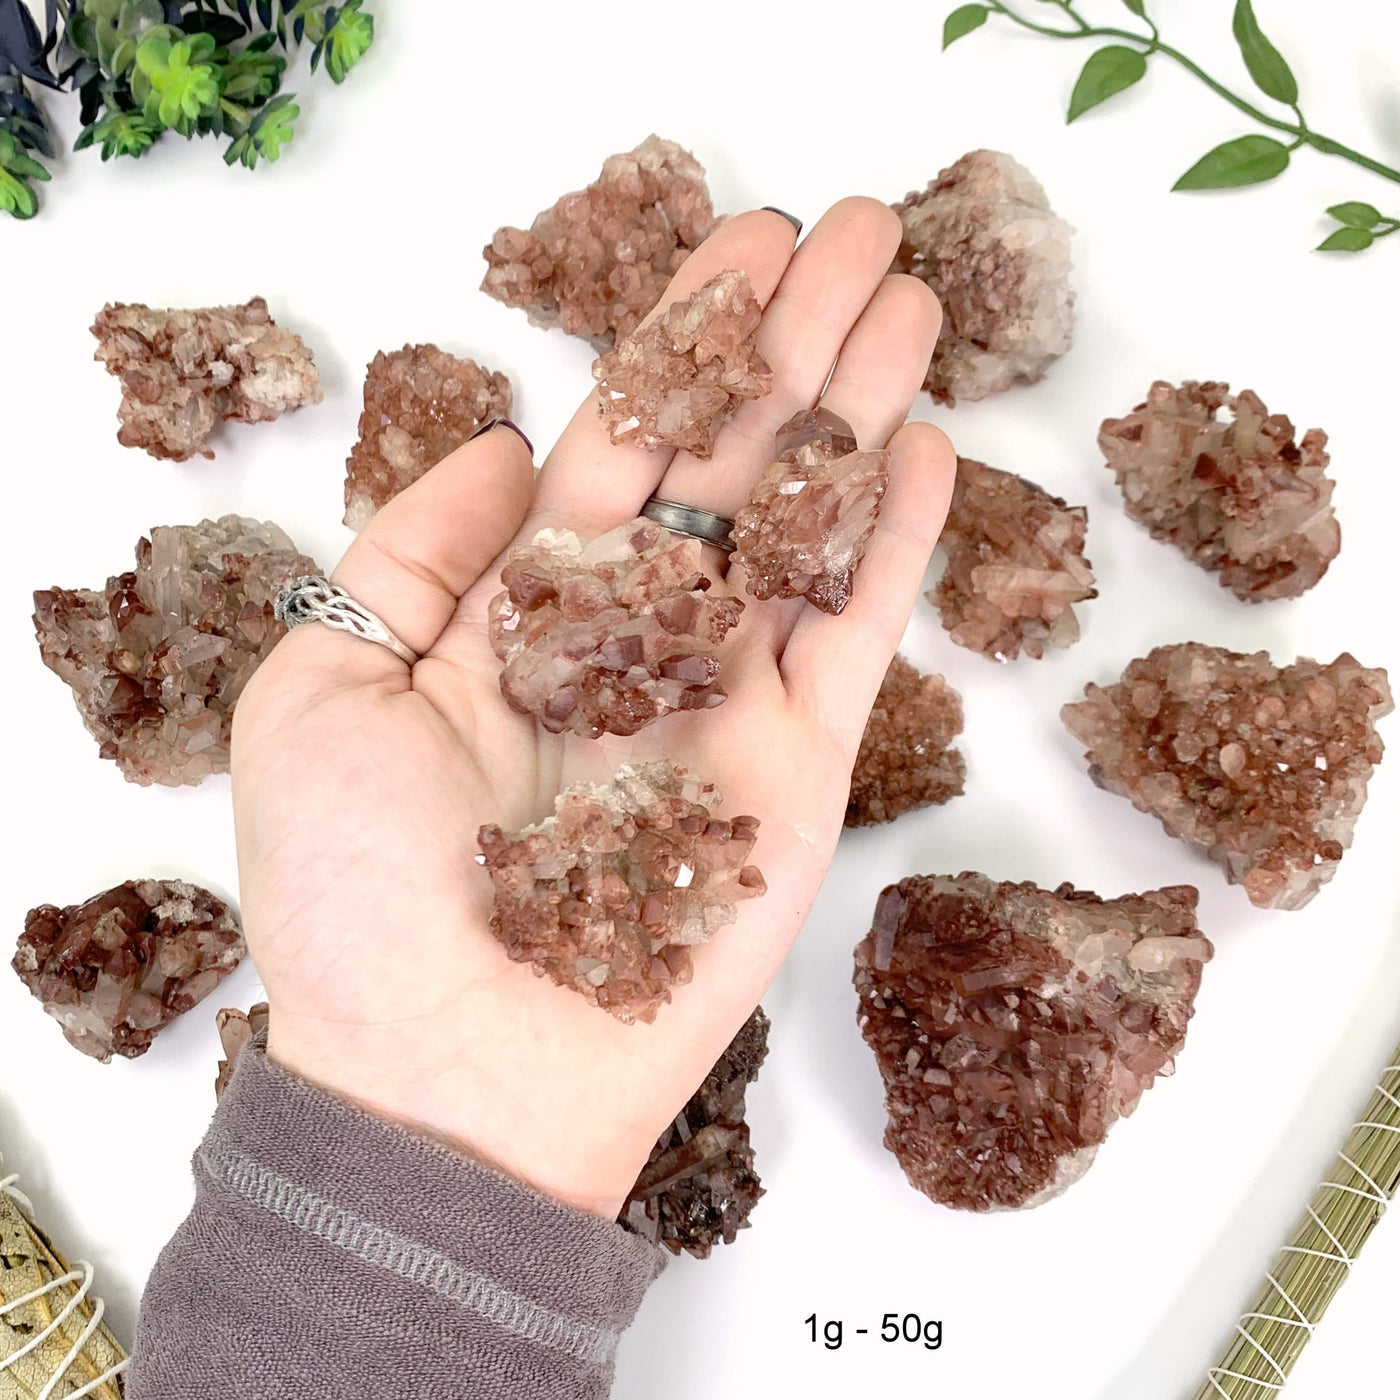 1 gram to 5 gram lithium quartz clusters 4 pieces fit in the palm of a man's hand